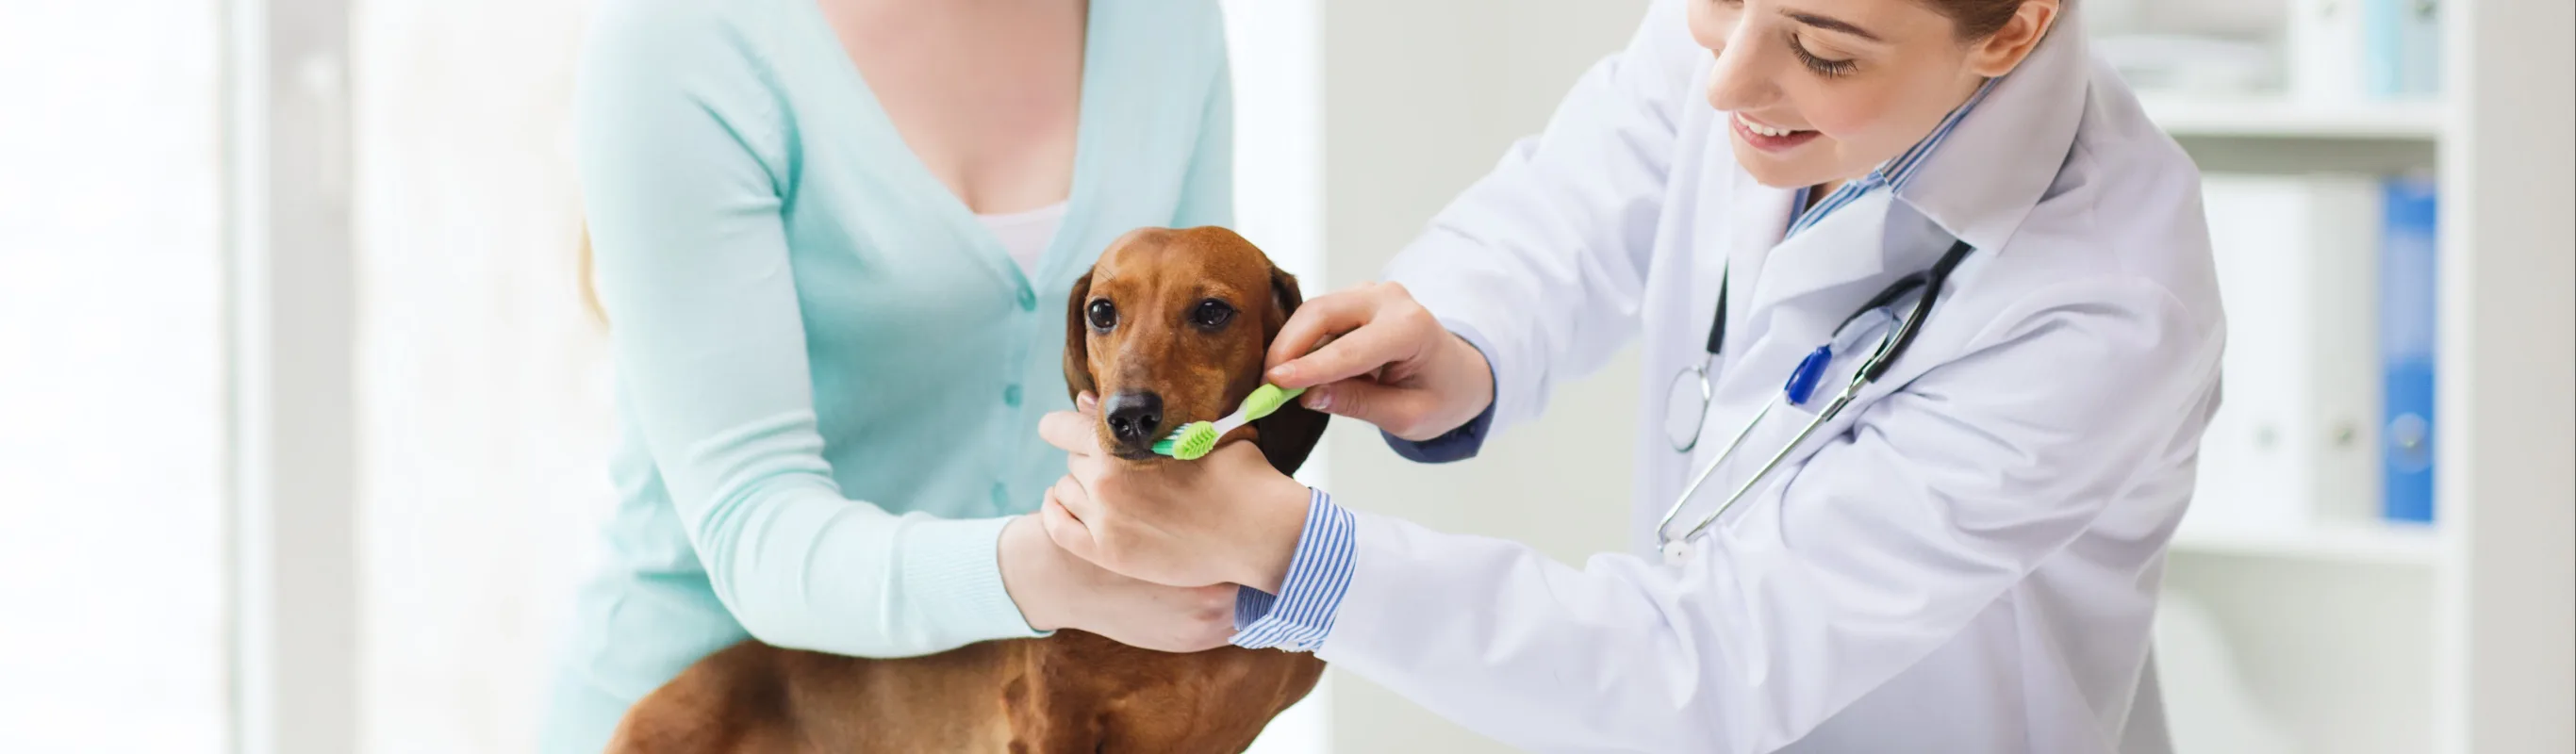 Veterinary staff performing dentistry on a dog